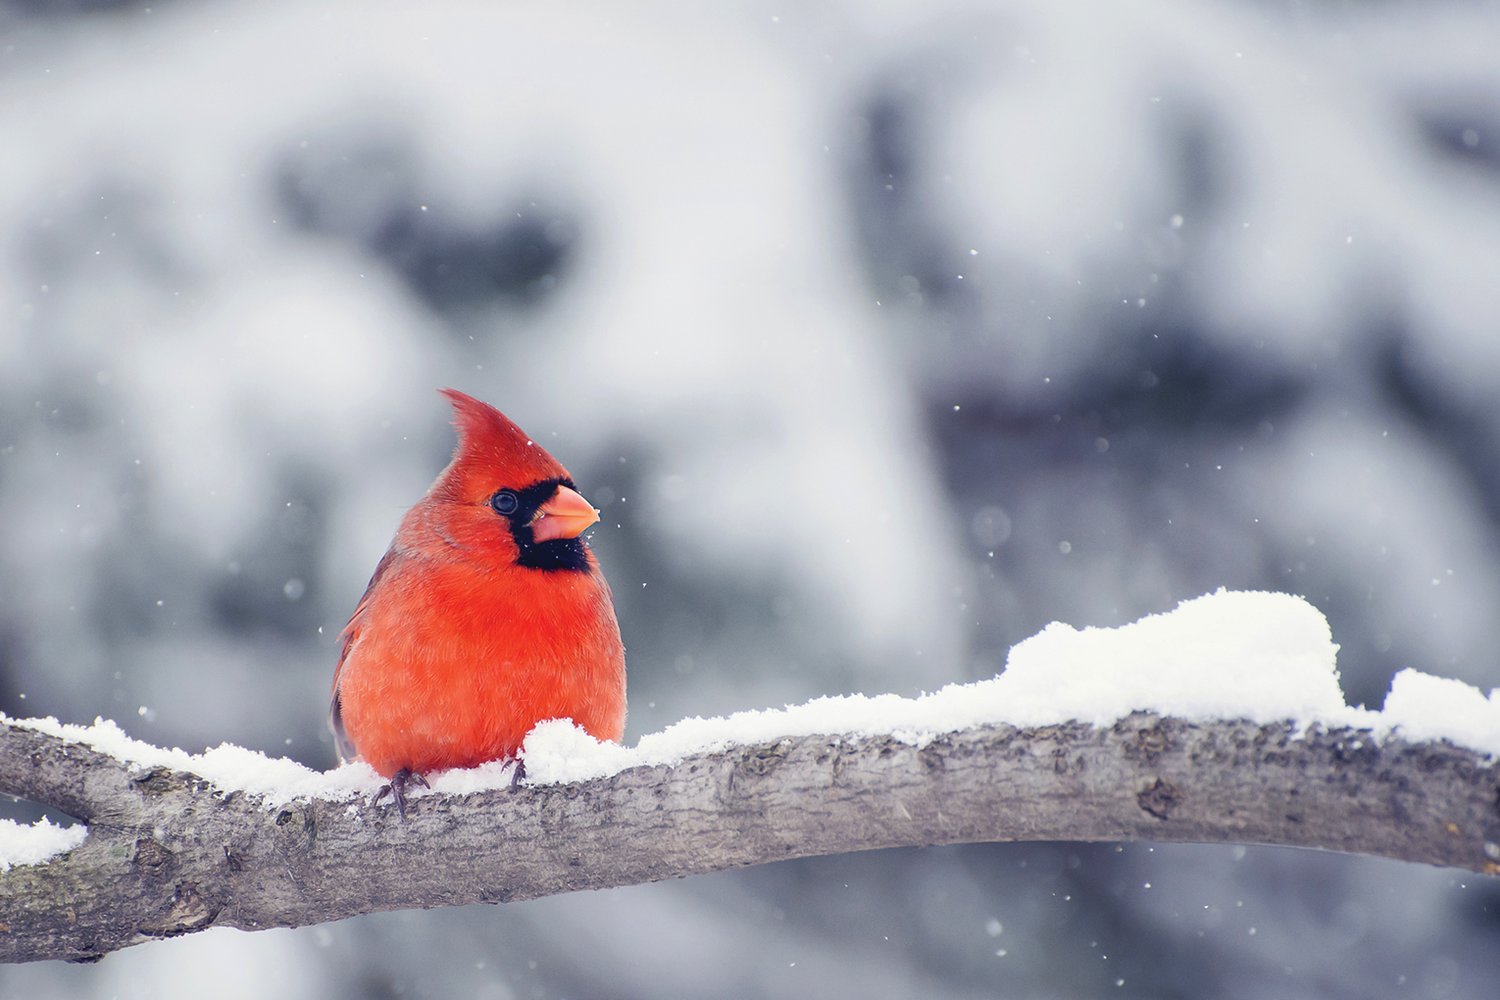 One of the most recognized birds, the cardinal offers a melodious song, splashy red color, and a jaunty crest. They are year-round residents and don’t migrate in the winter.